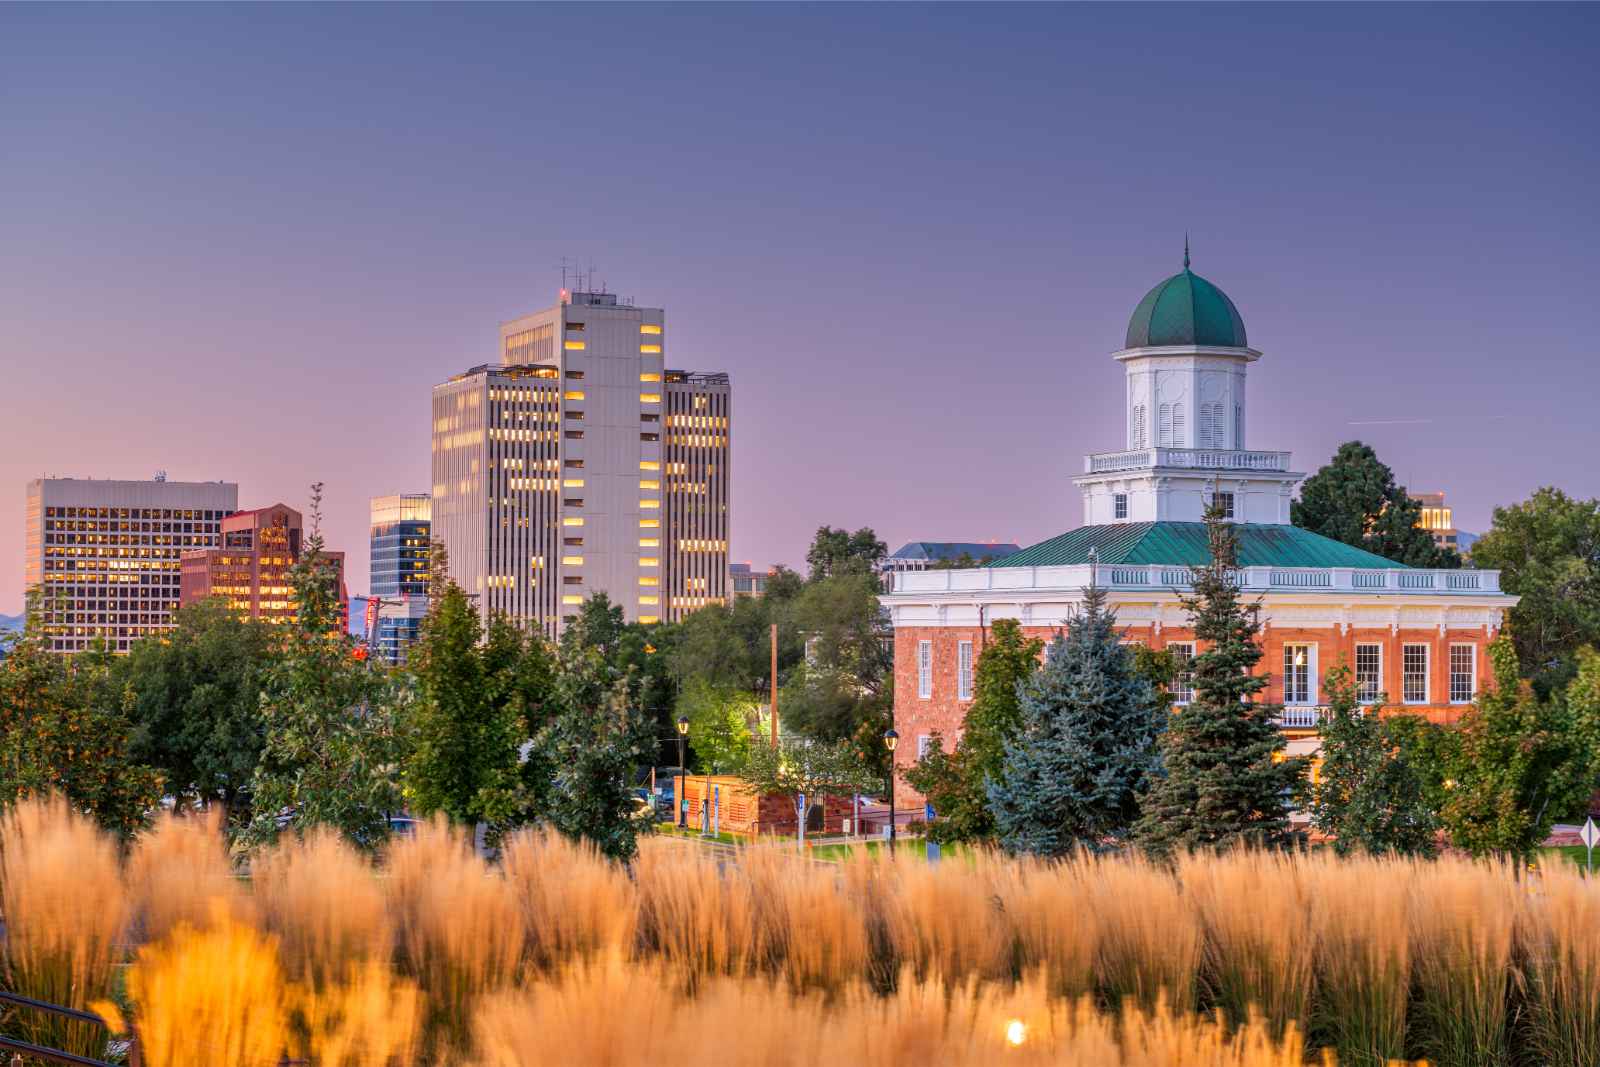 25 Best Things To Do in Salt Lake City, Utah: Our Recommendations